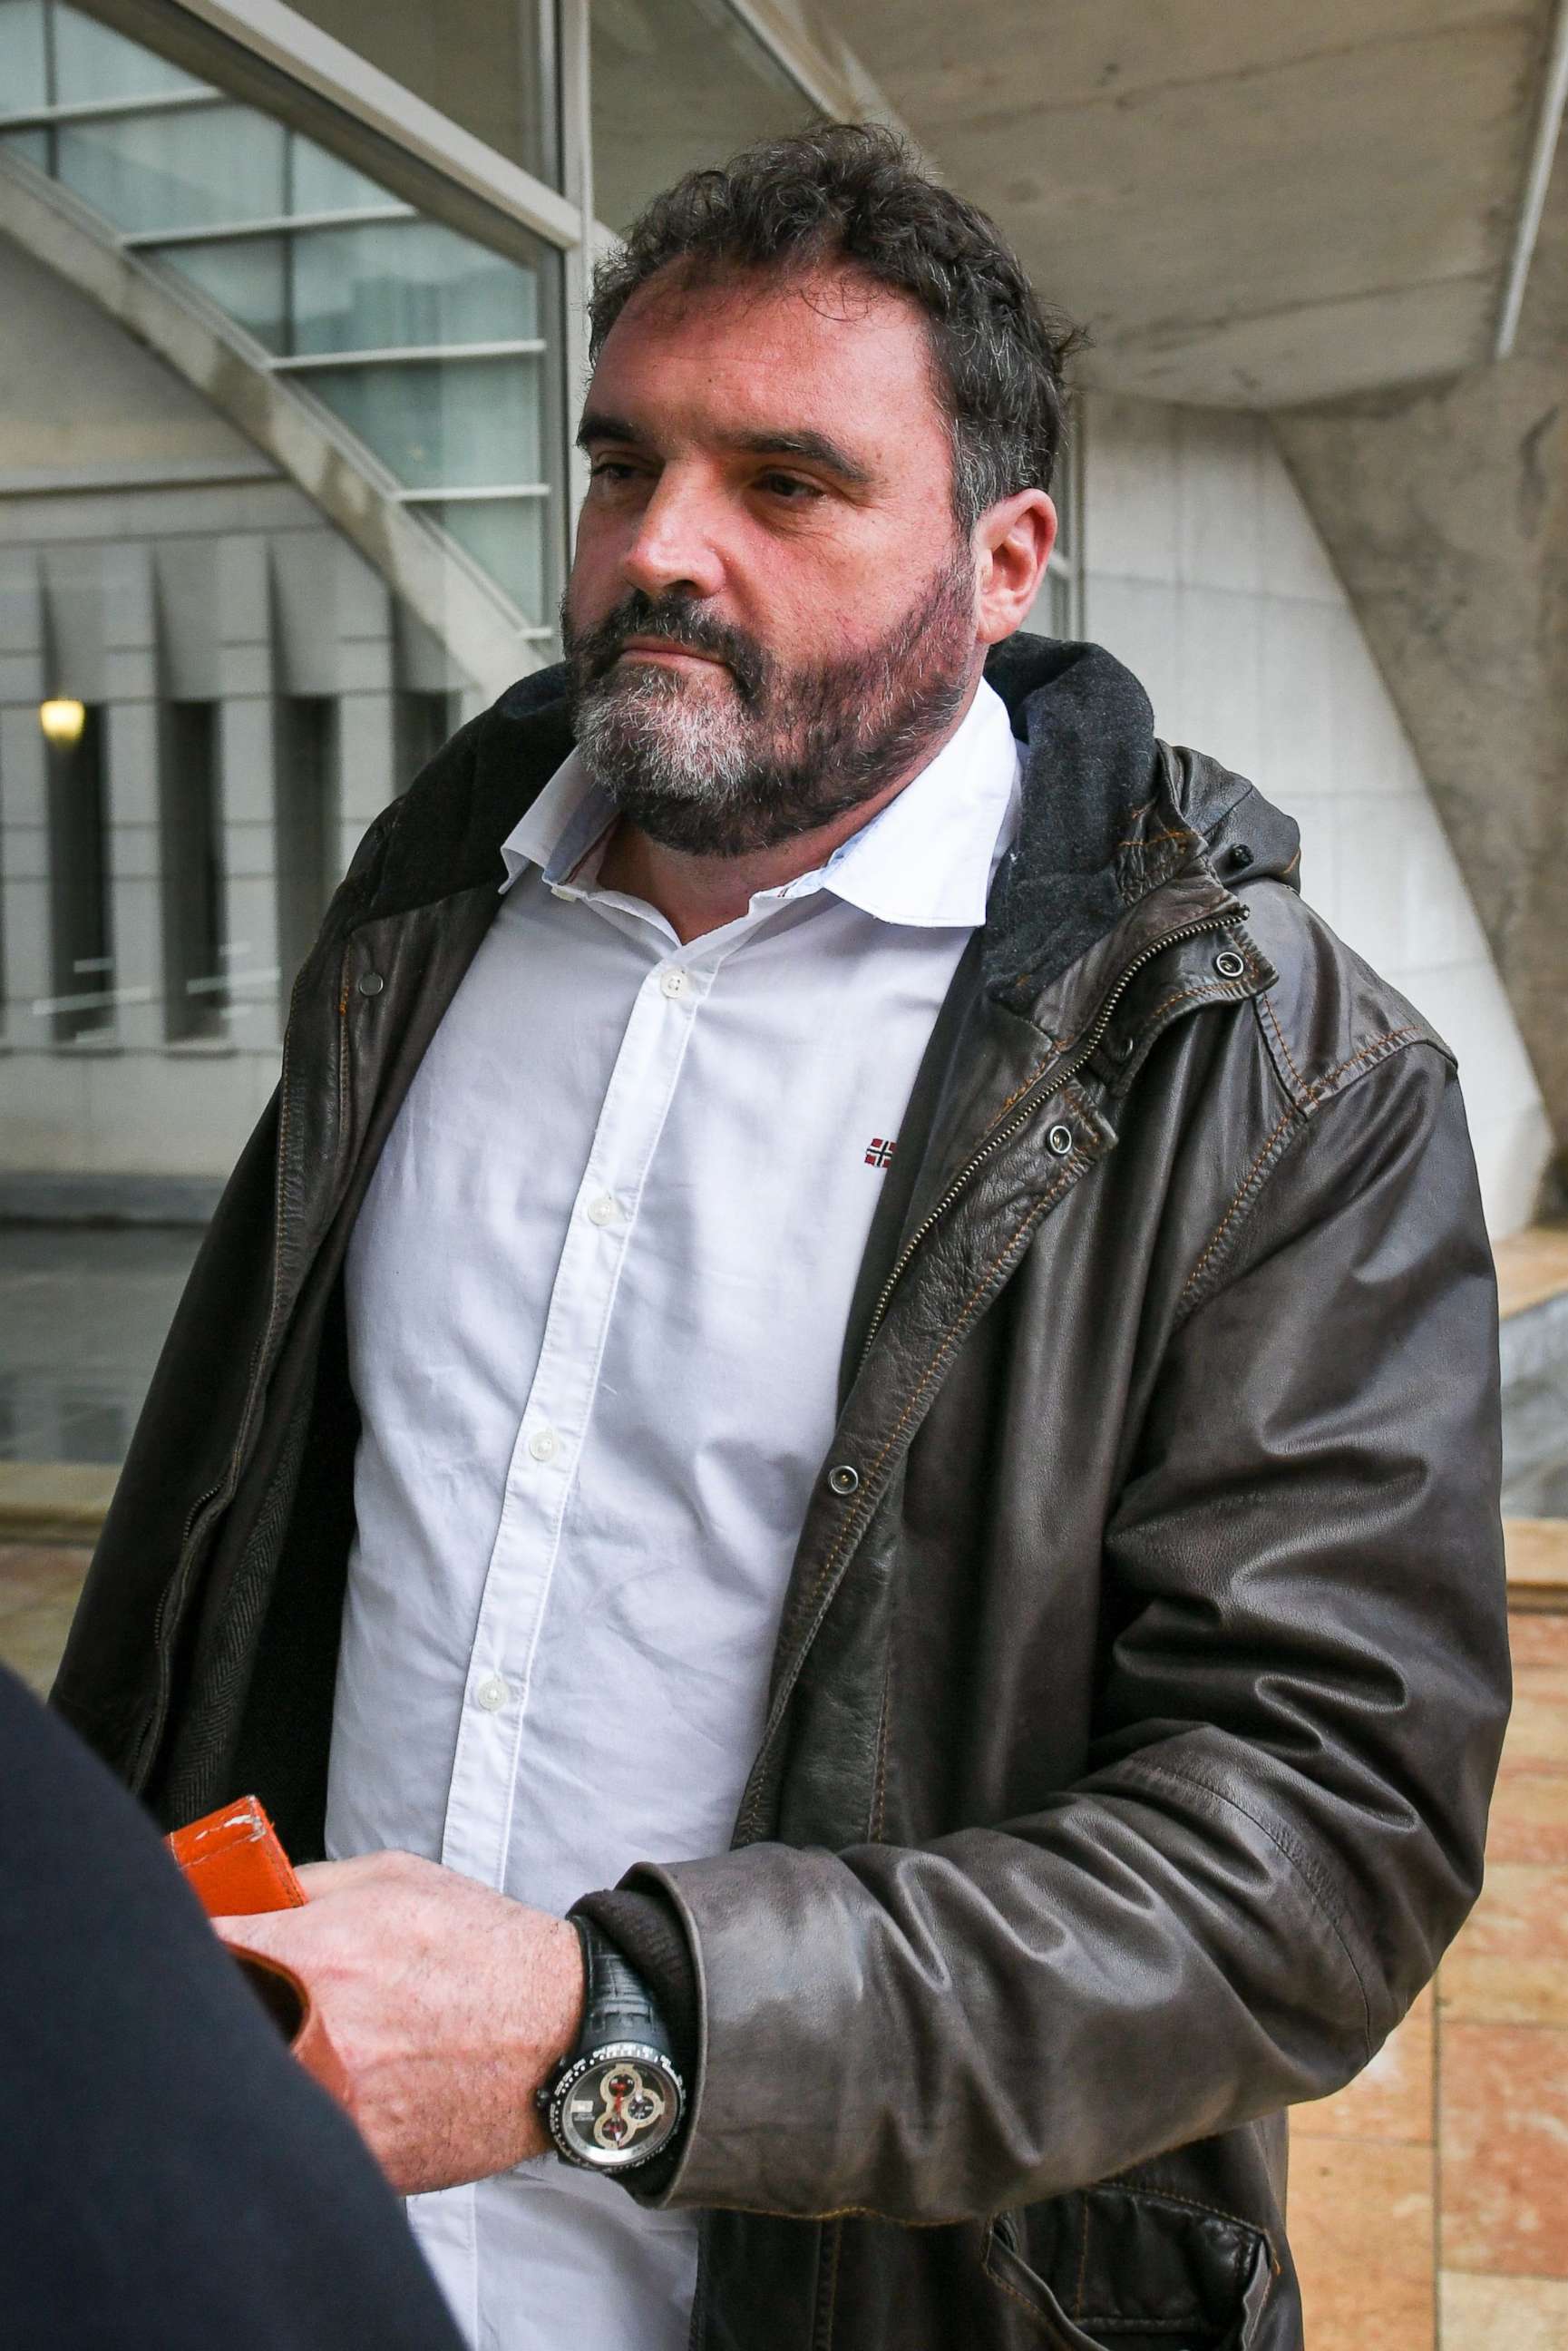 PHOTO: Frederic Pechier arrives at the Besancon courthouse on June 12, 2019 in France.